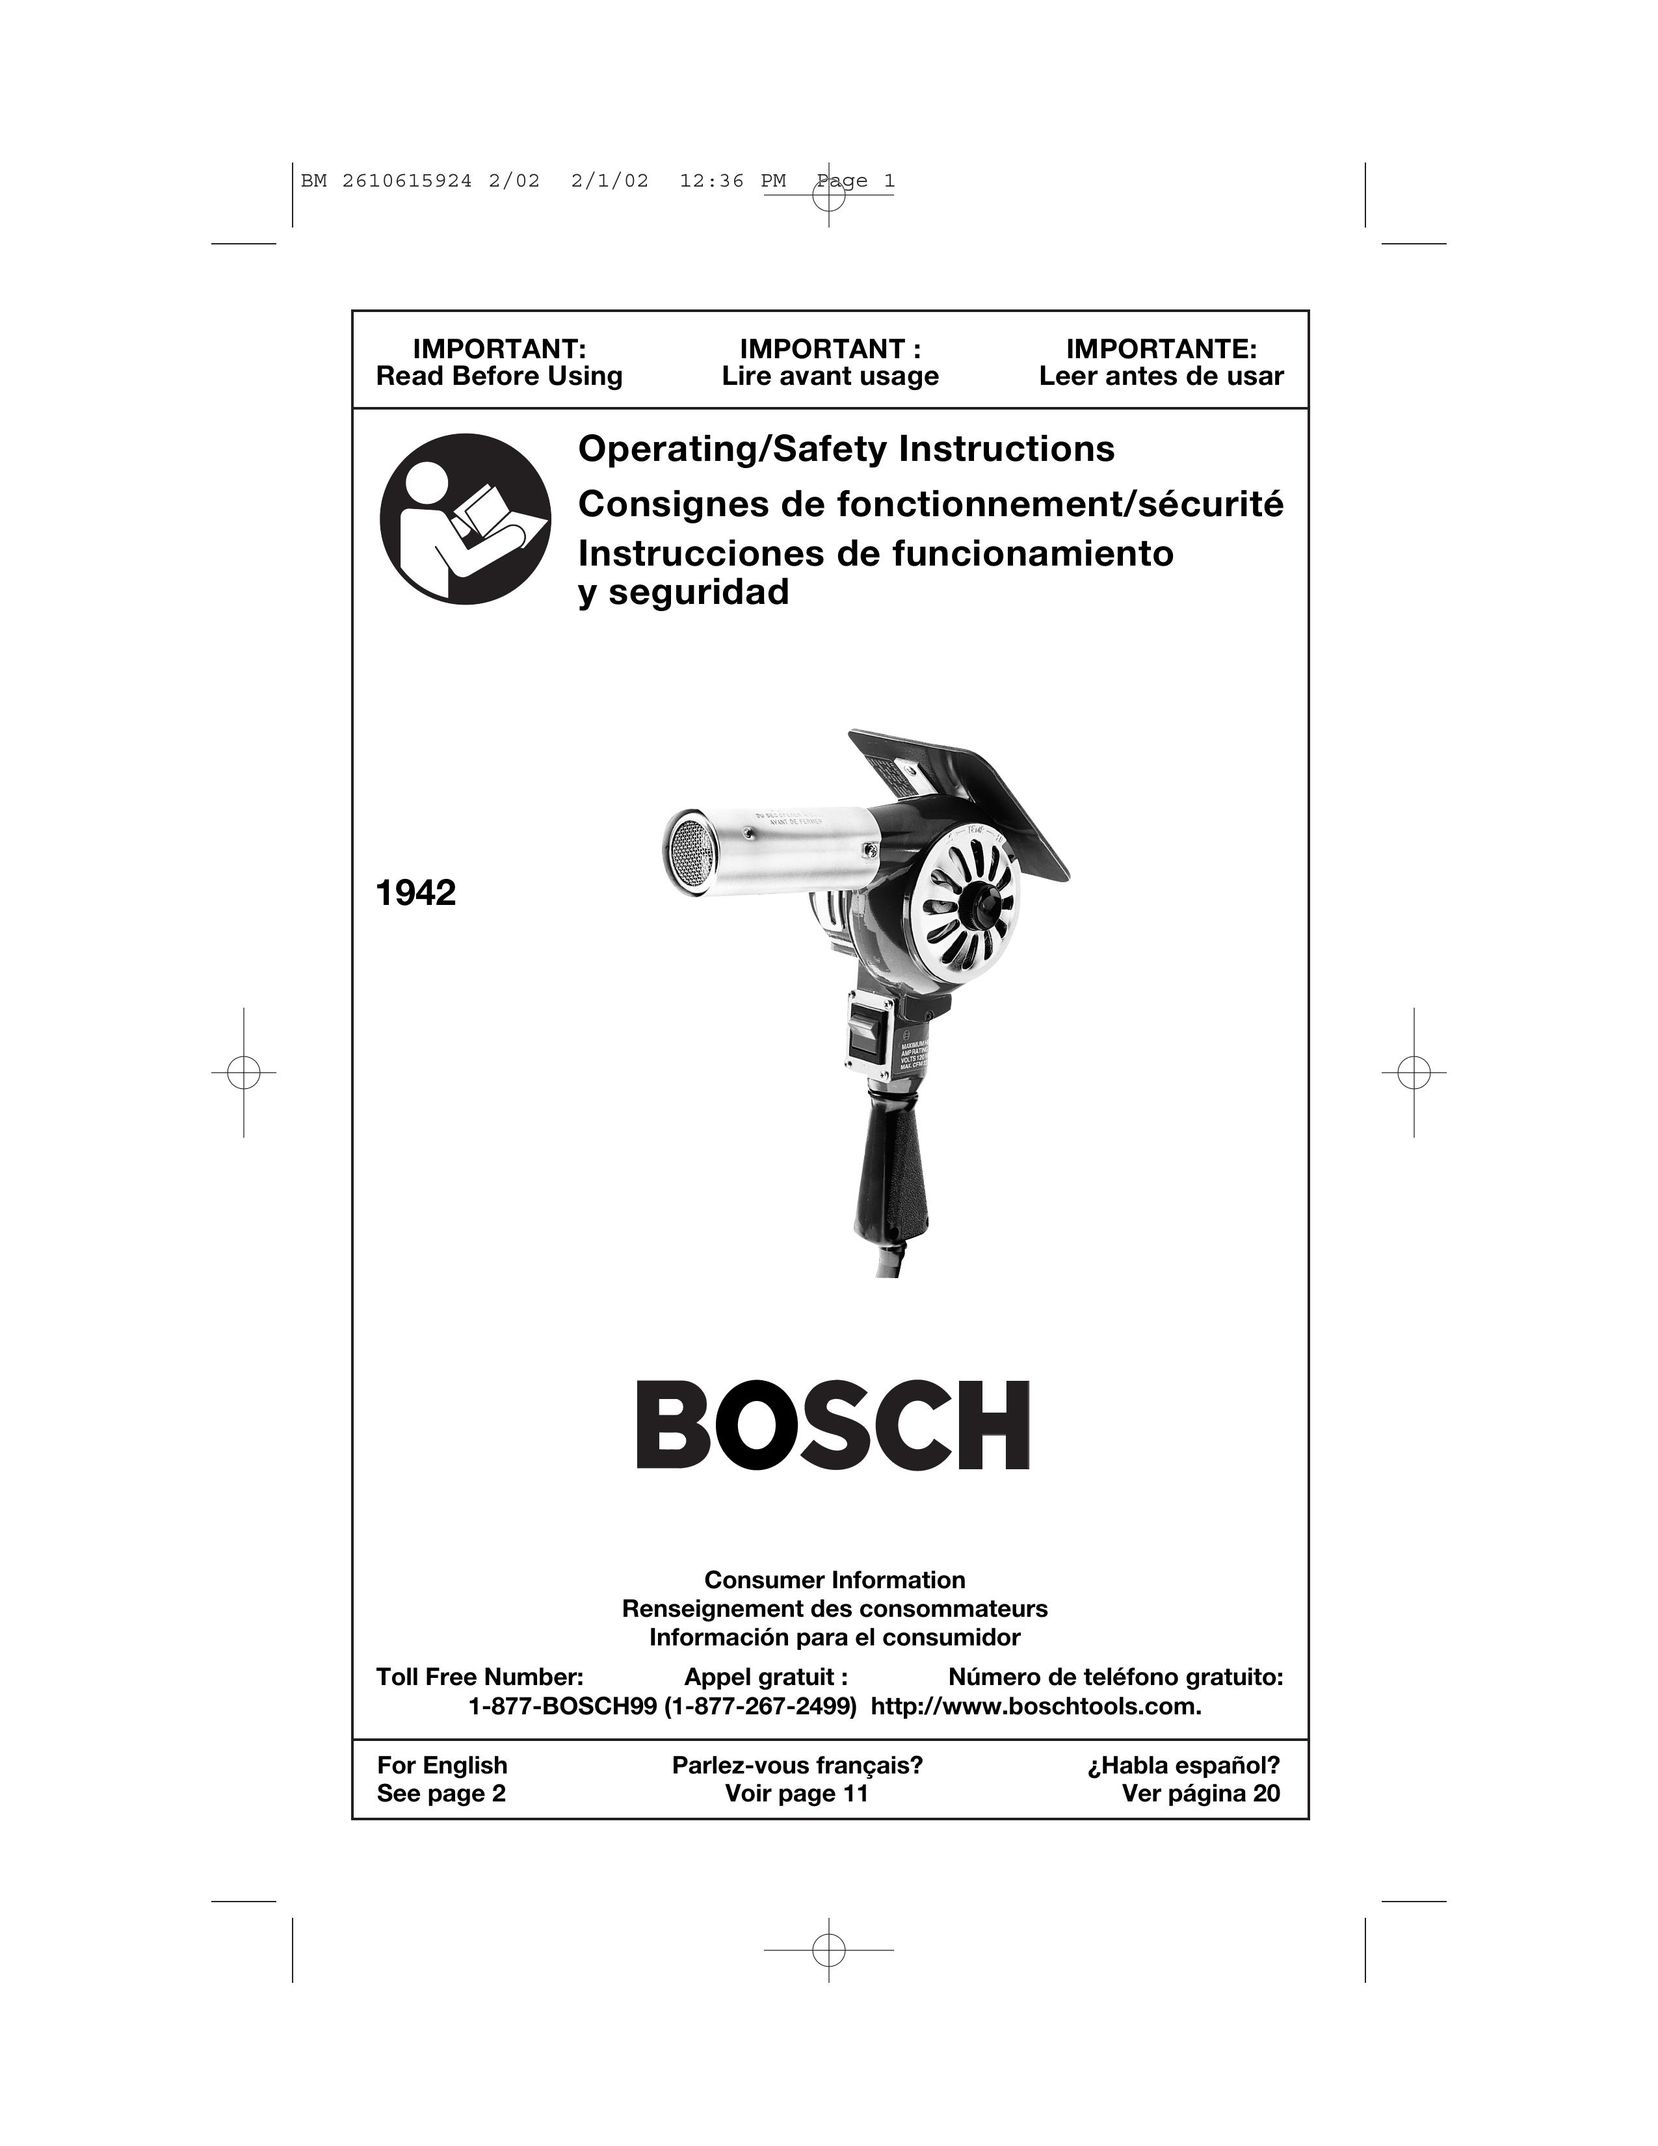 Bosch Power Tools 1942 Electric Heater User Manual